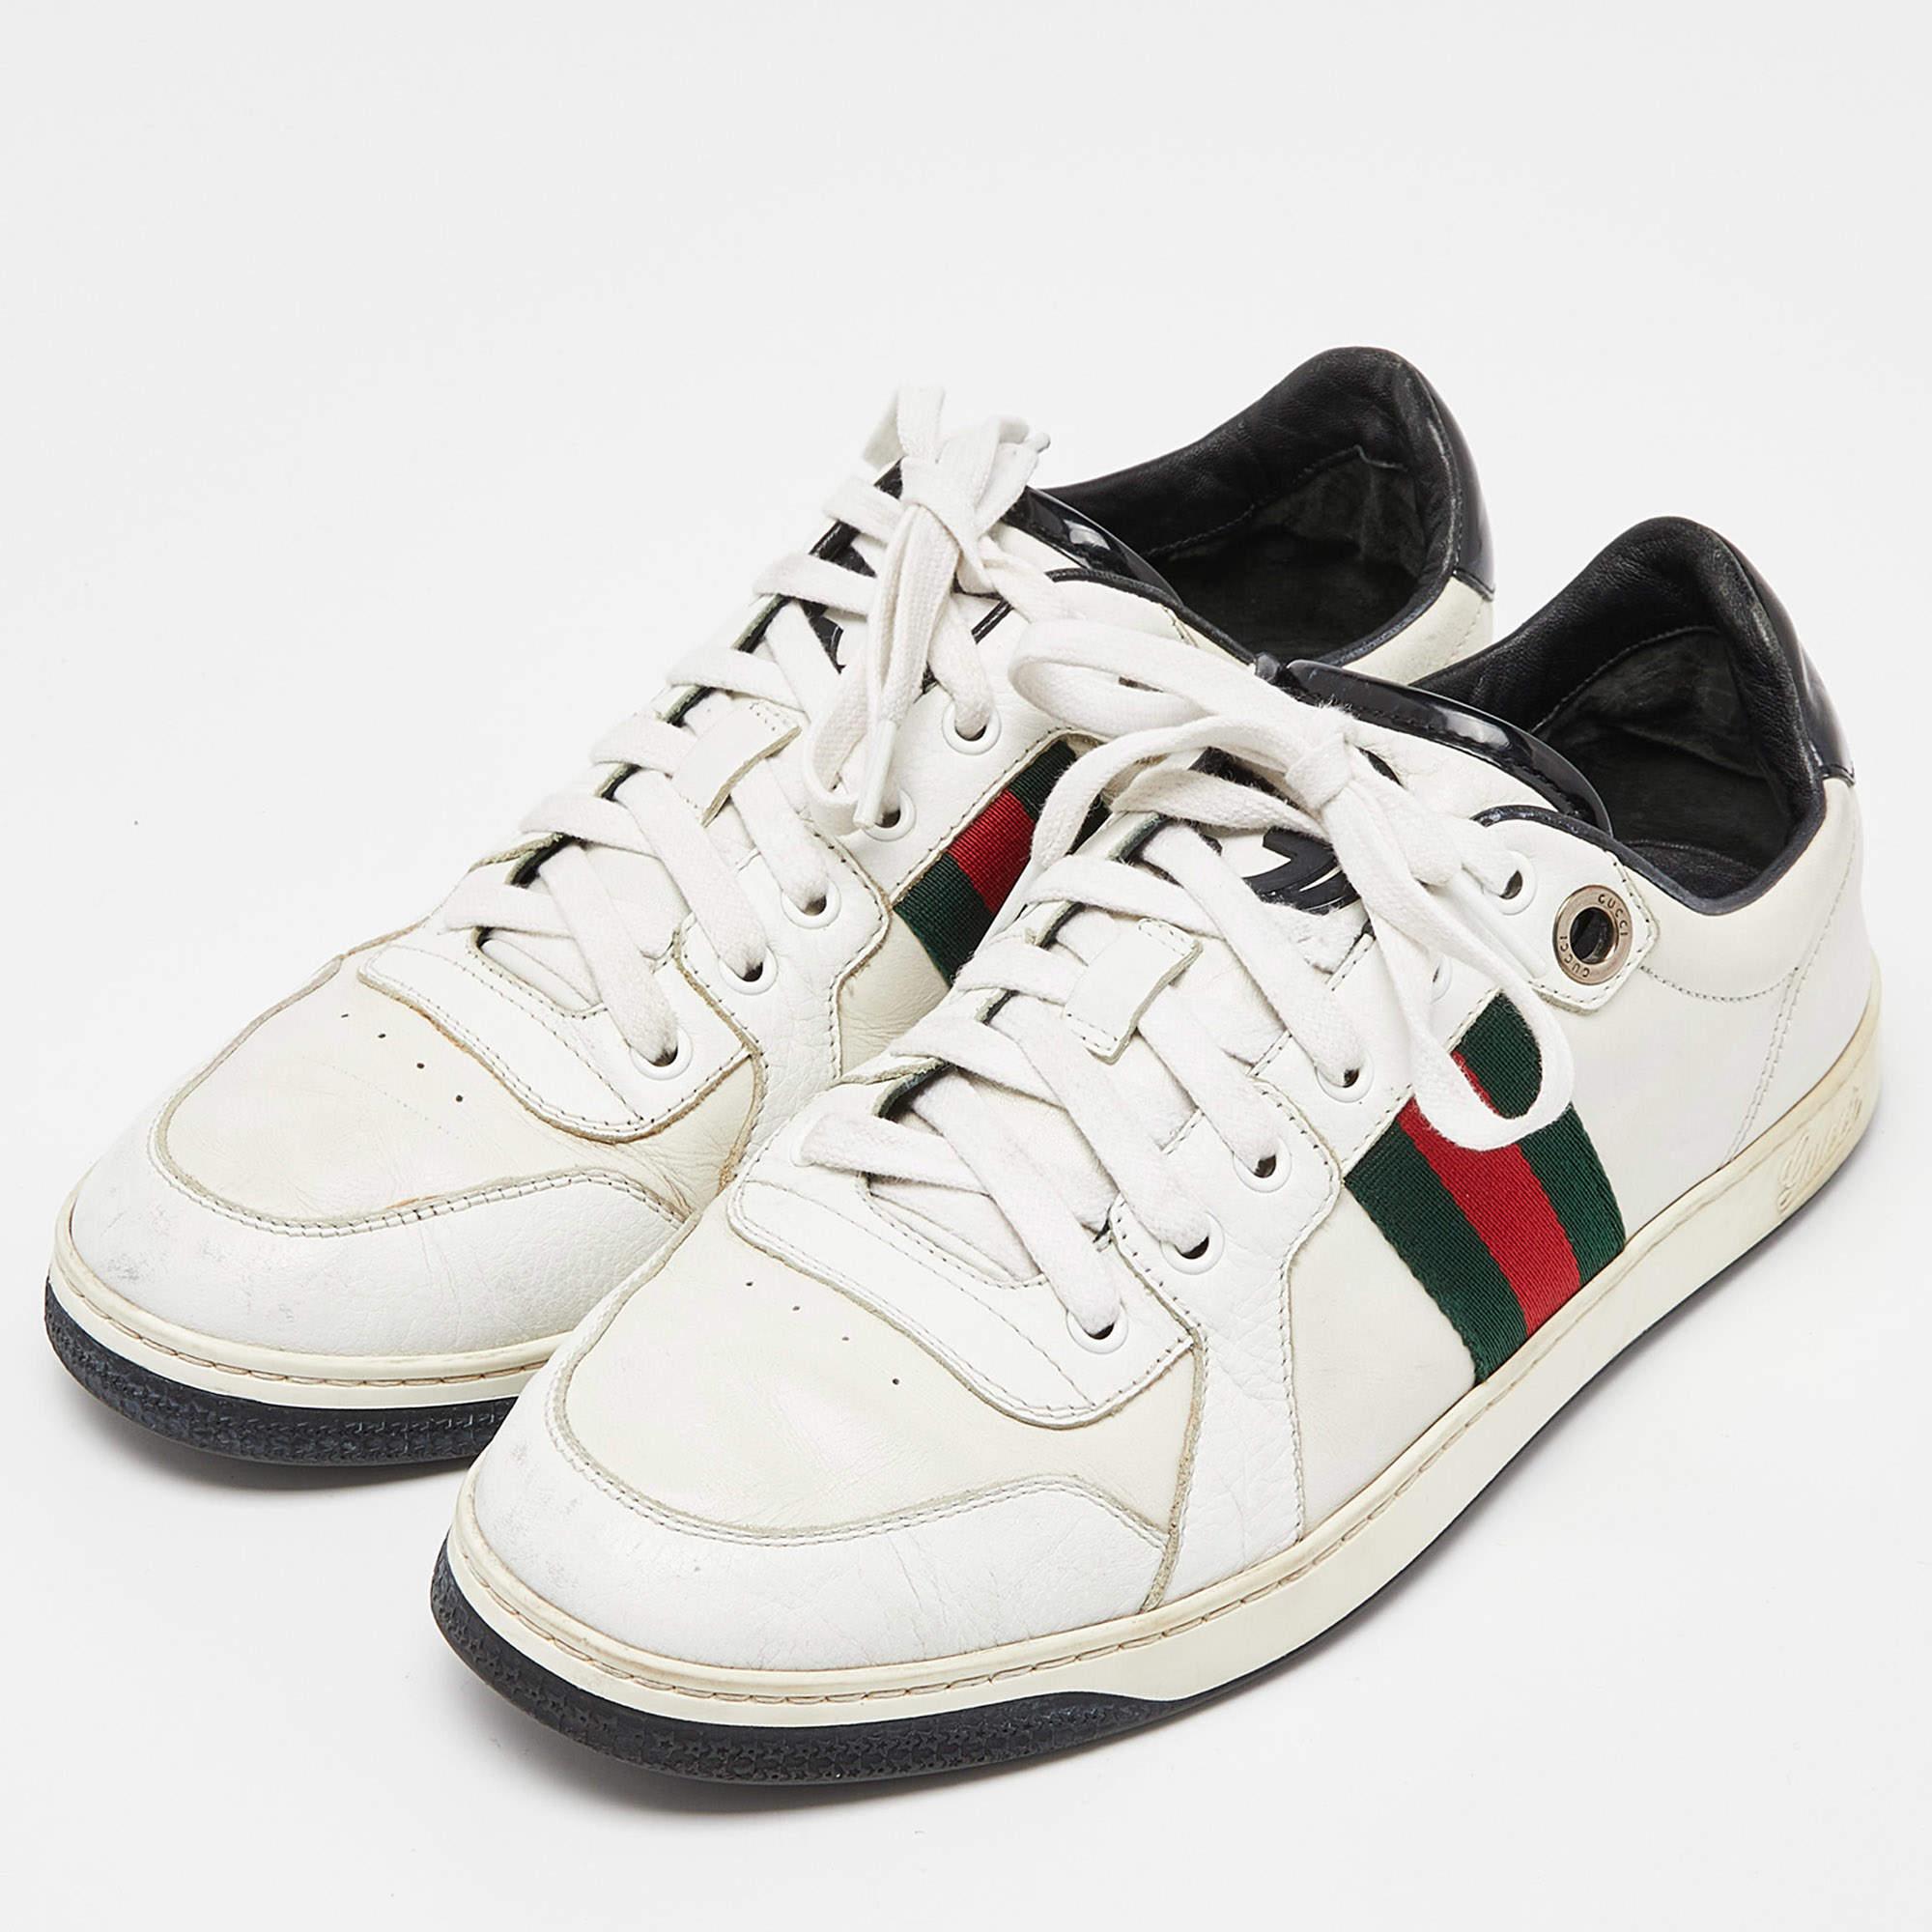 Stacked with signature details, this Gucci pair is rendered in leather and is designed in a low-top style with lace-up vamps. They have been fashioned with the iconic Web stripes. Complete with logo-accented counters, these shoes can be easily